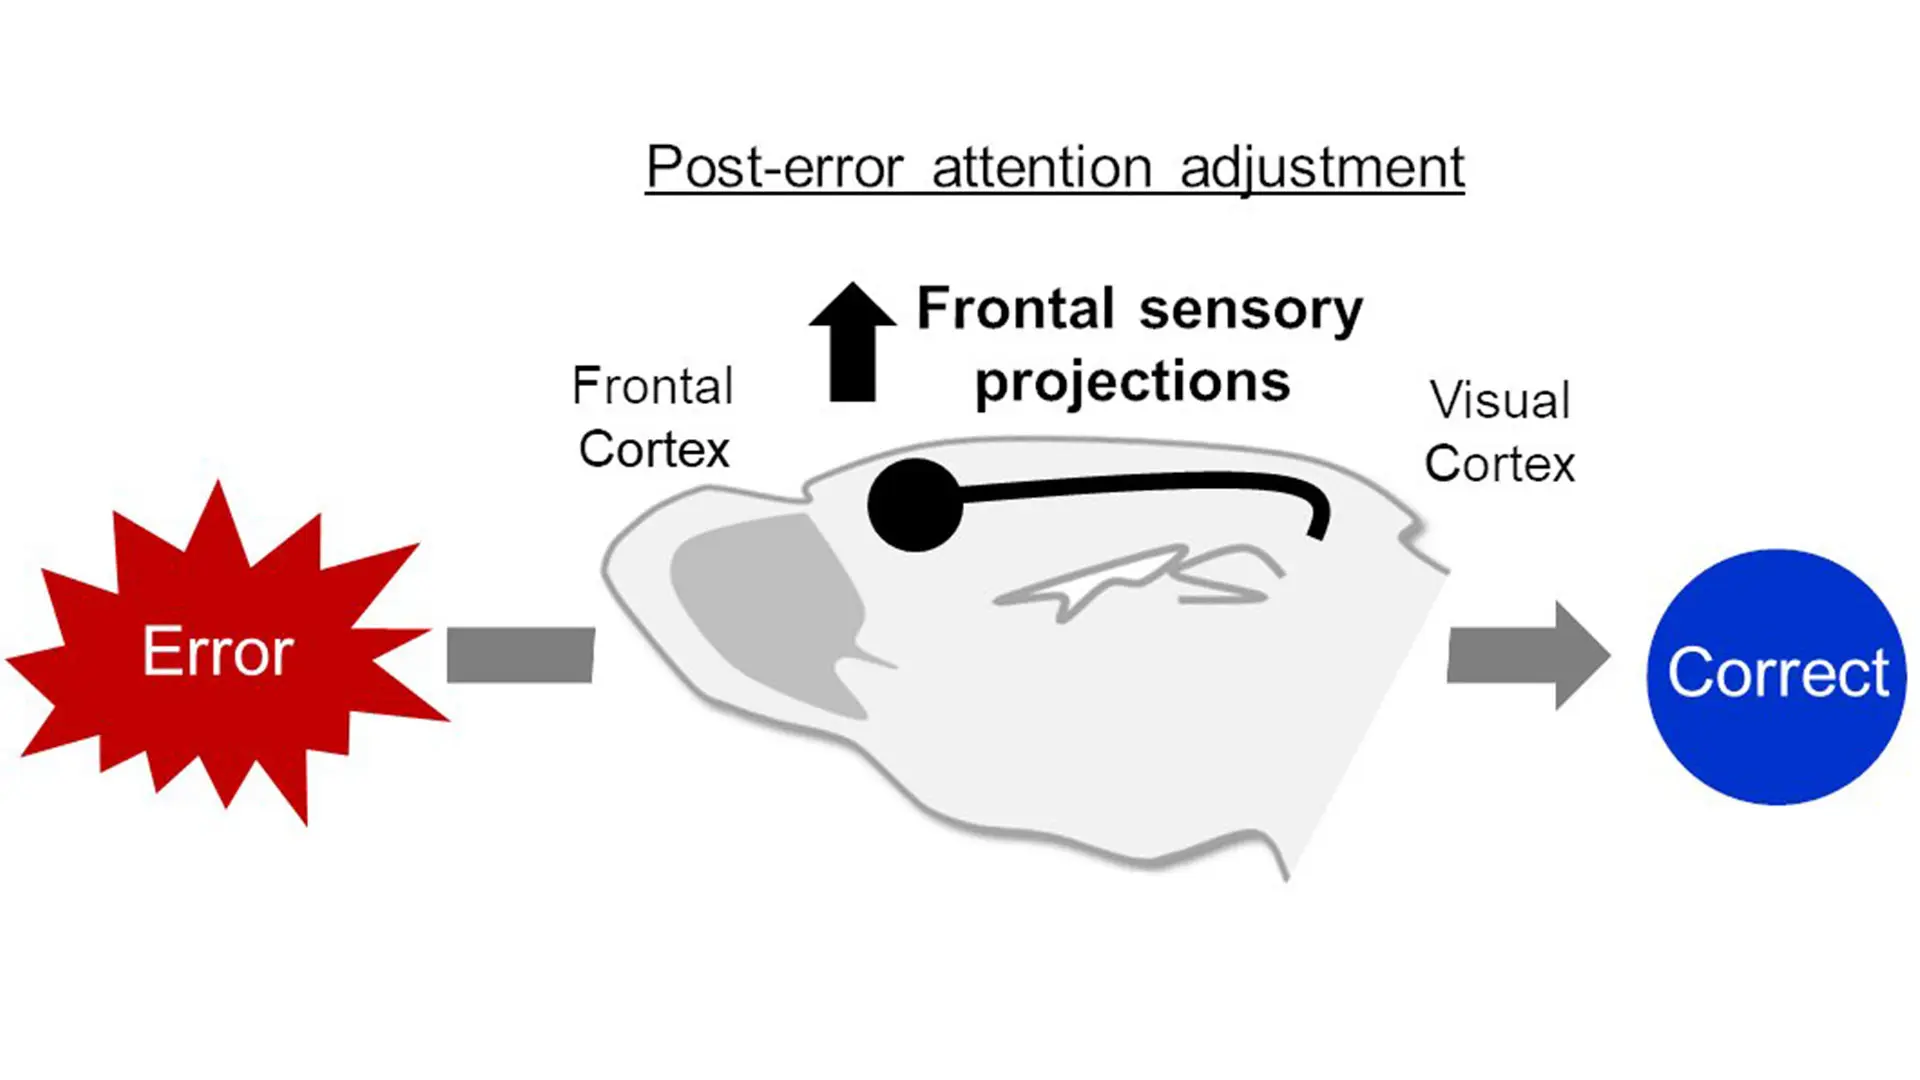 In mice, anterior cingulate neurons projecting to visual cortex causally link error monitoring and attentional adjustment, two fundamental components of cognitive control systems.  